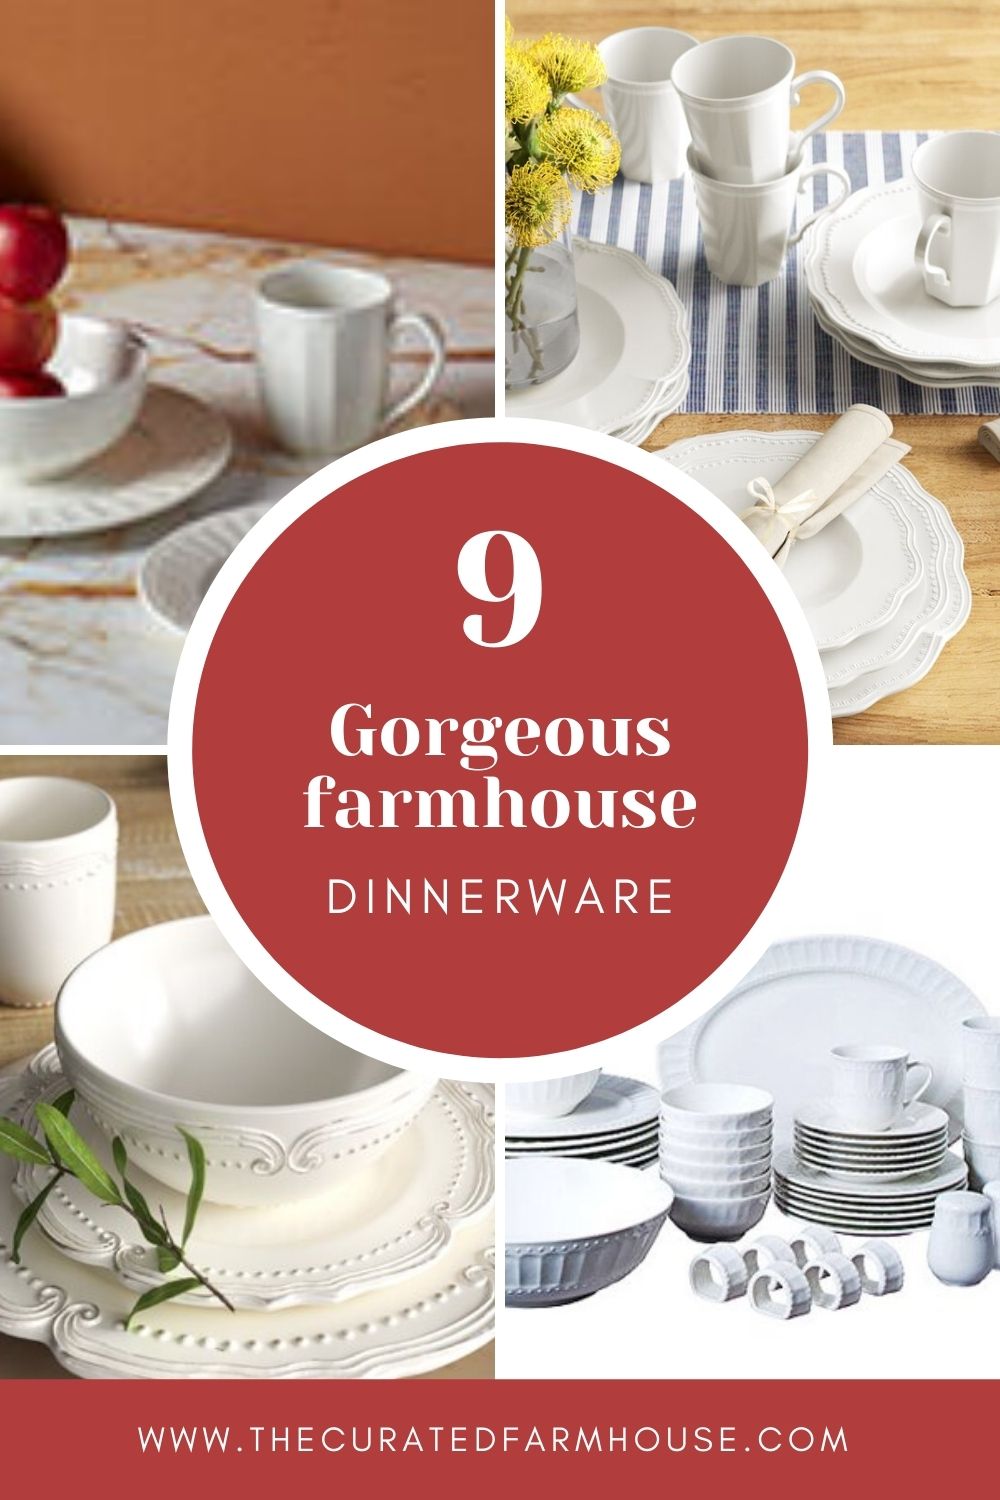 Look at These 9 Gorgeous Farmhouse Dinnerware Sets